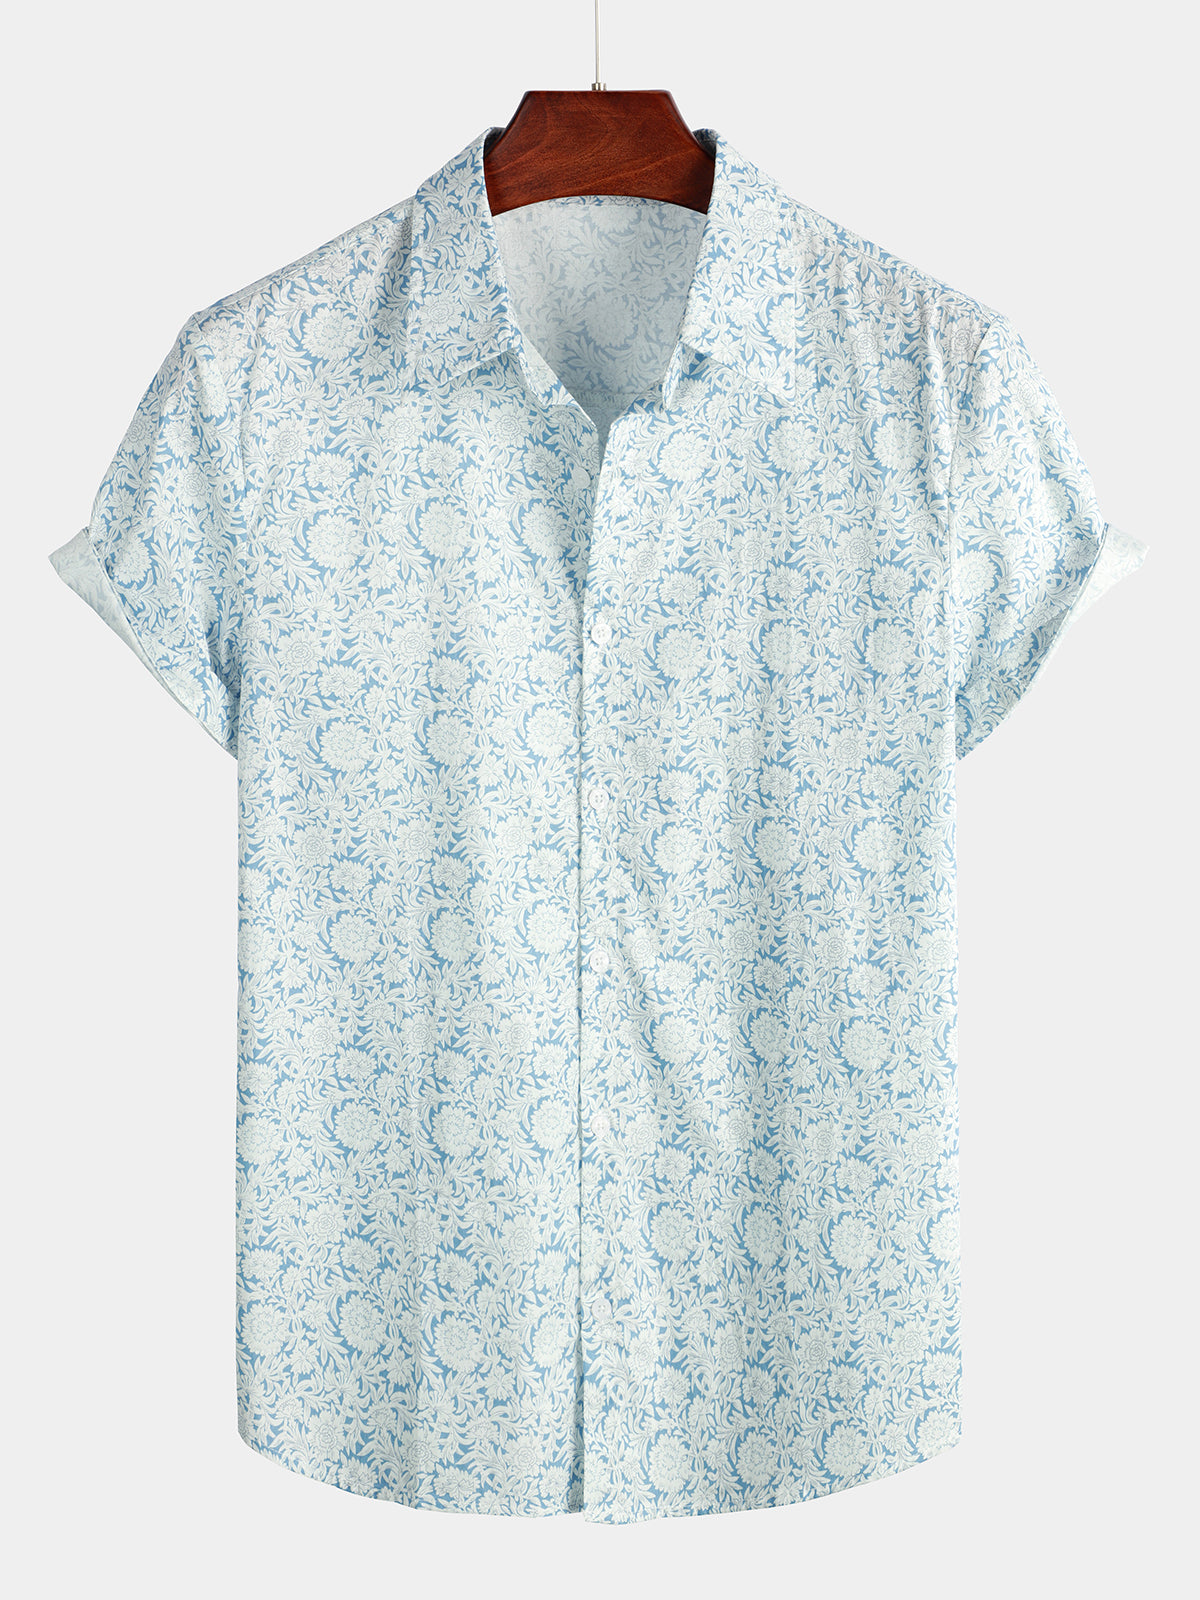 Men's Floral Printed Holiday Cotton Causal Shirt